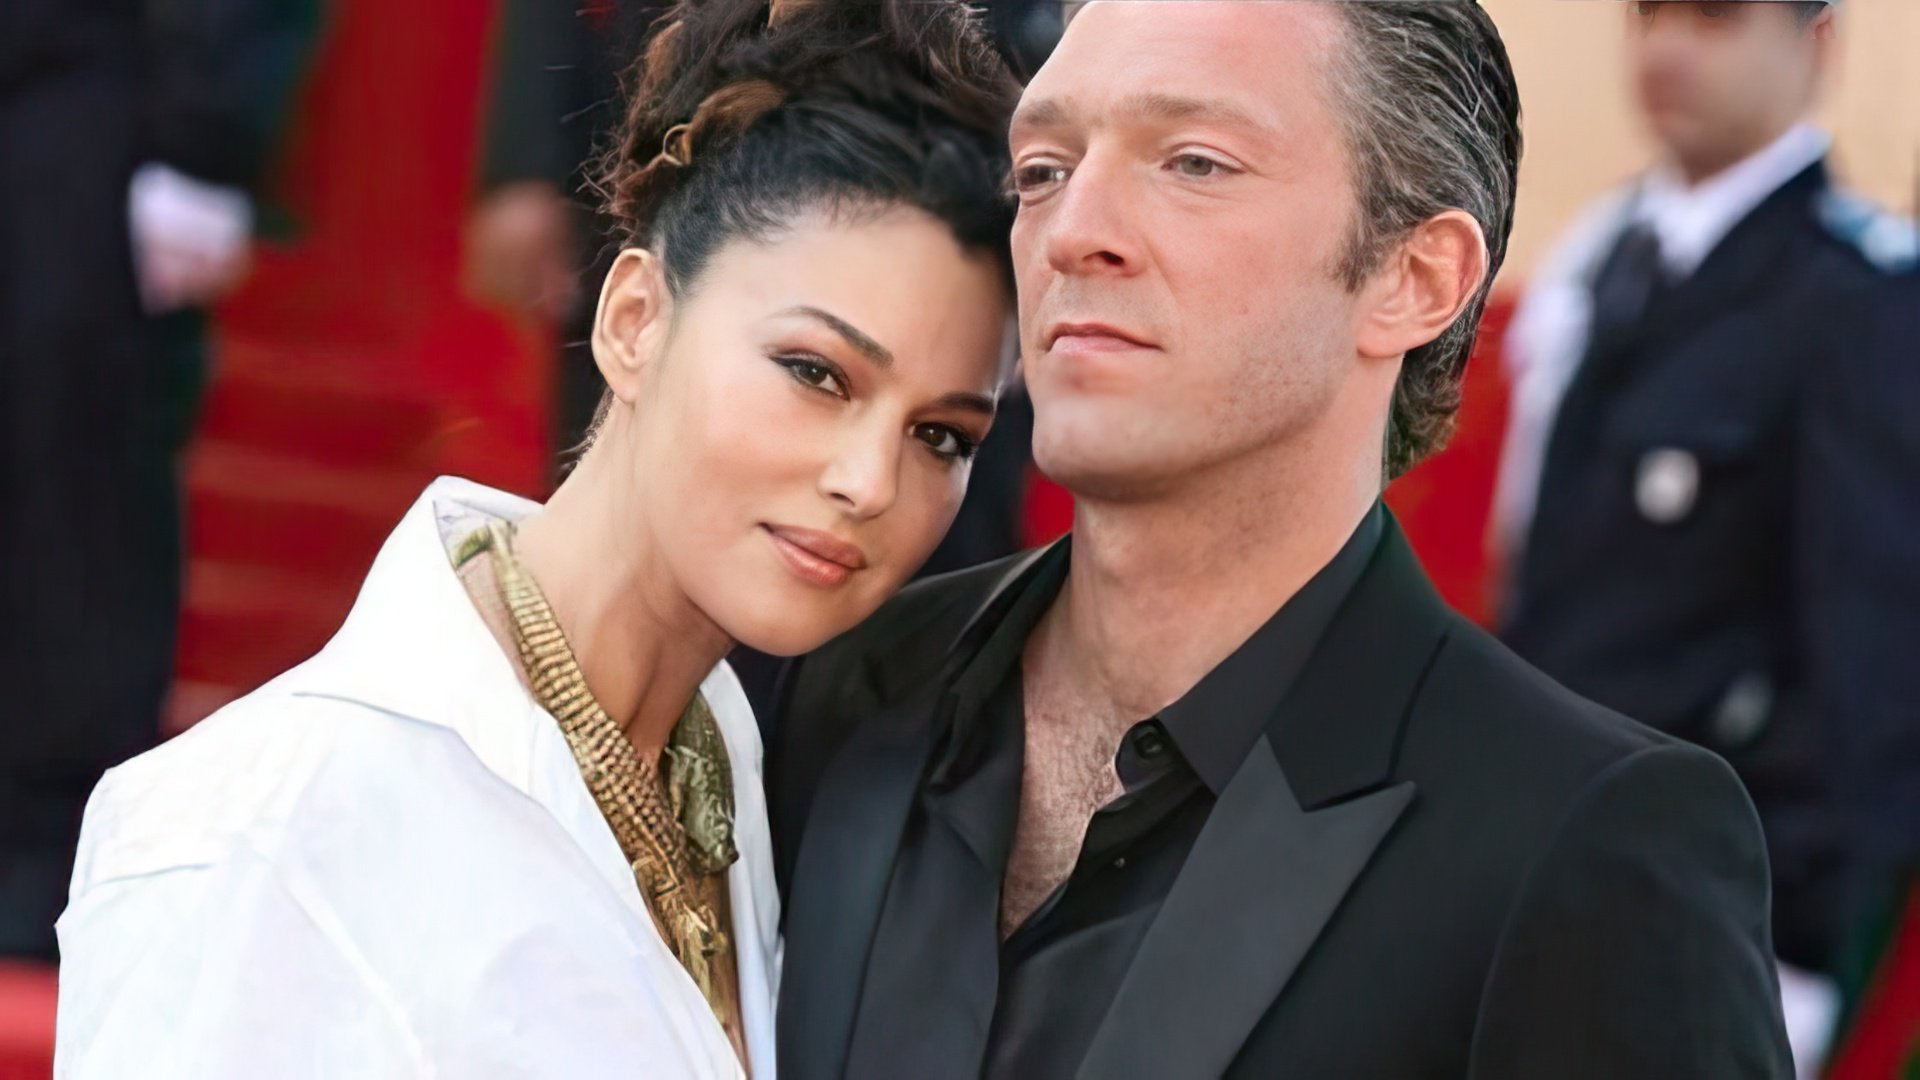 After 17 years of relationship Bellucci and Cassel's marriage has cracked